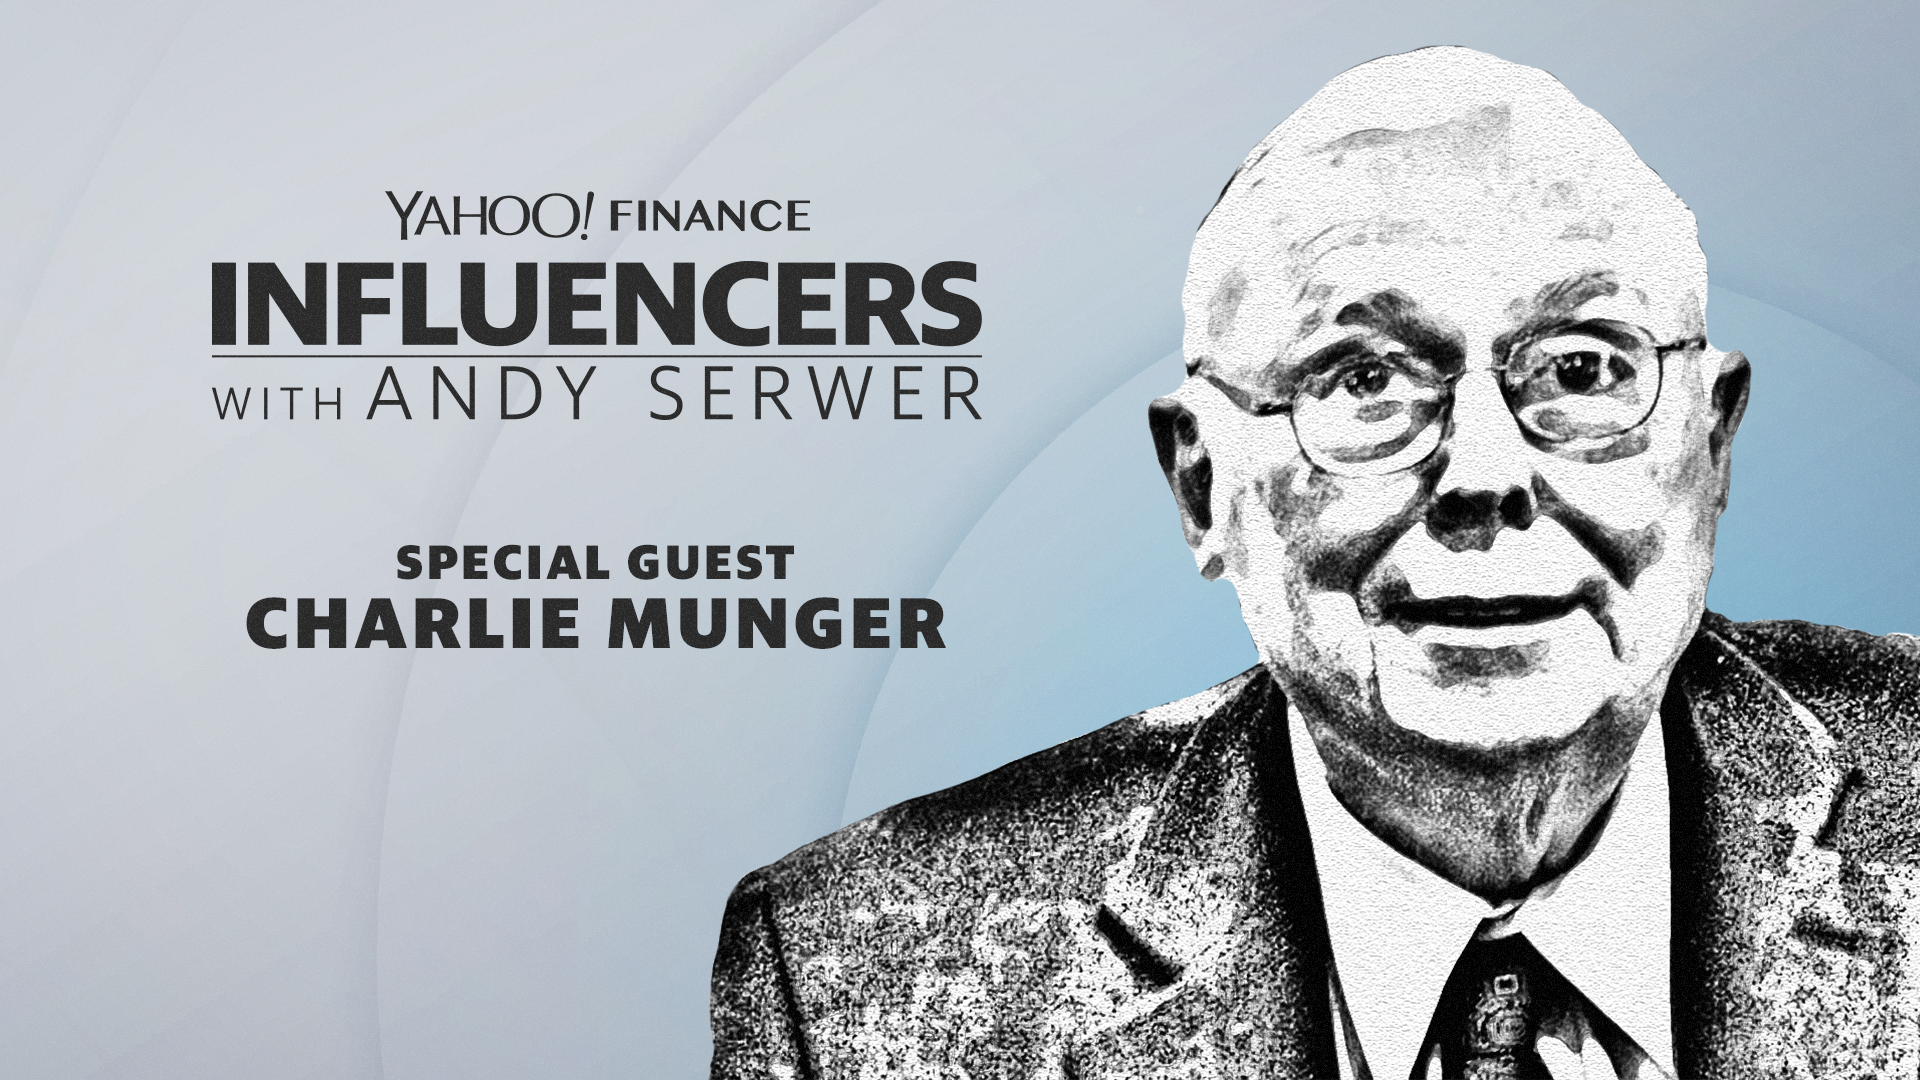 Charlie Munger Joins Influencers With Andy Serwer